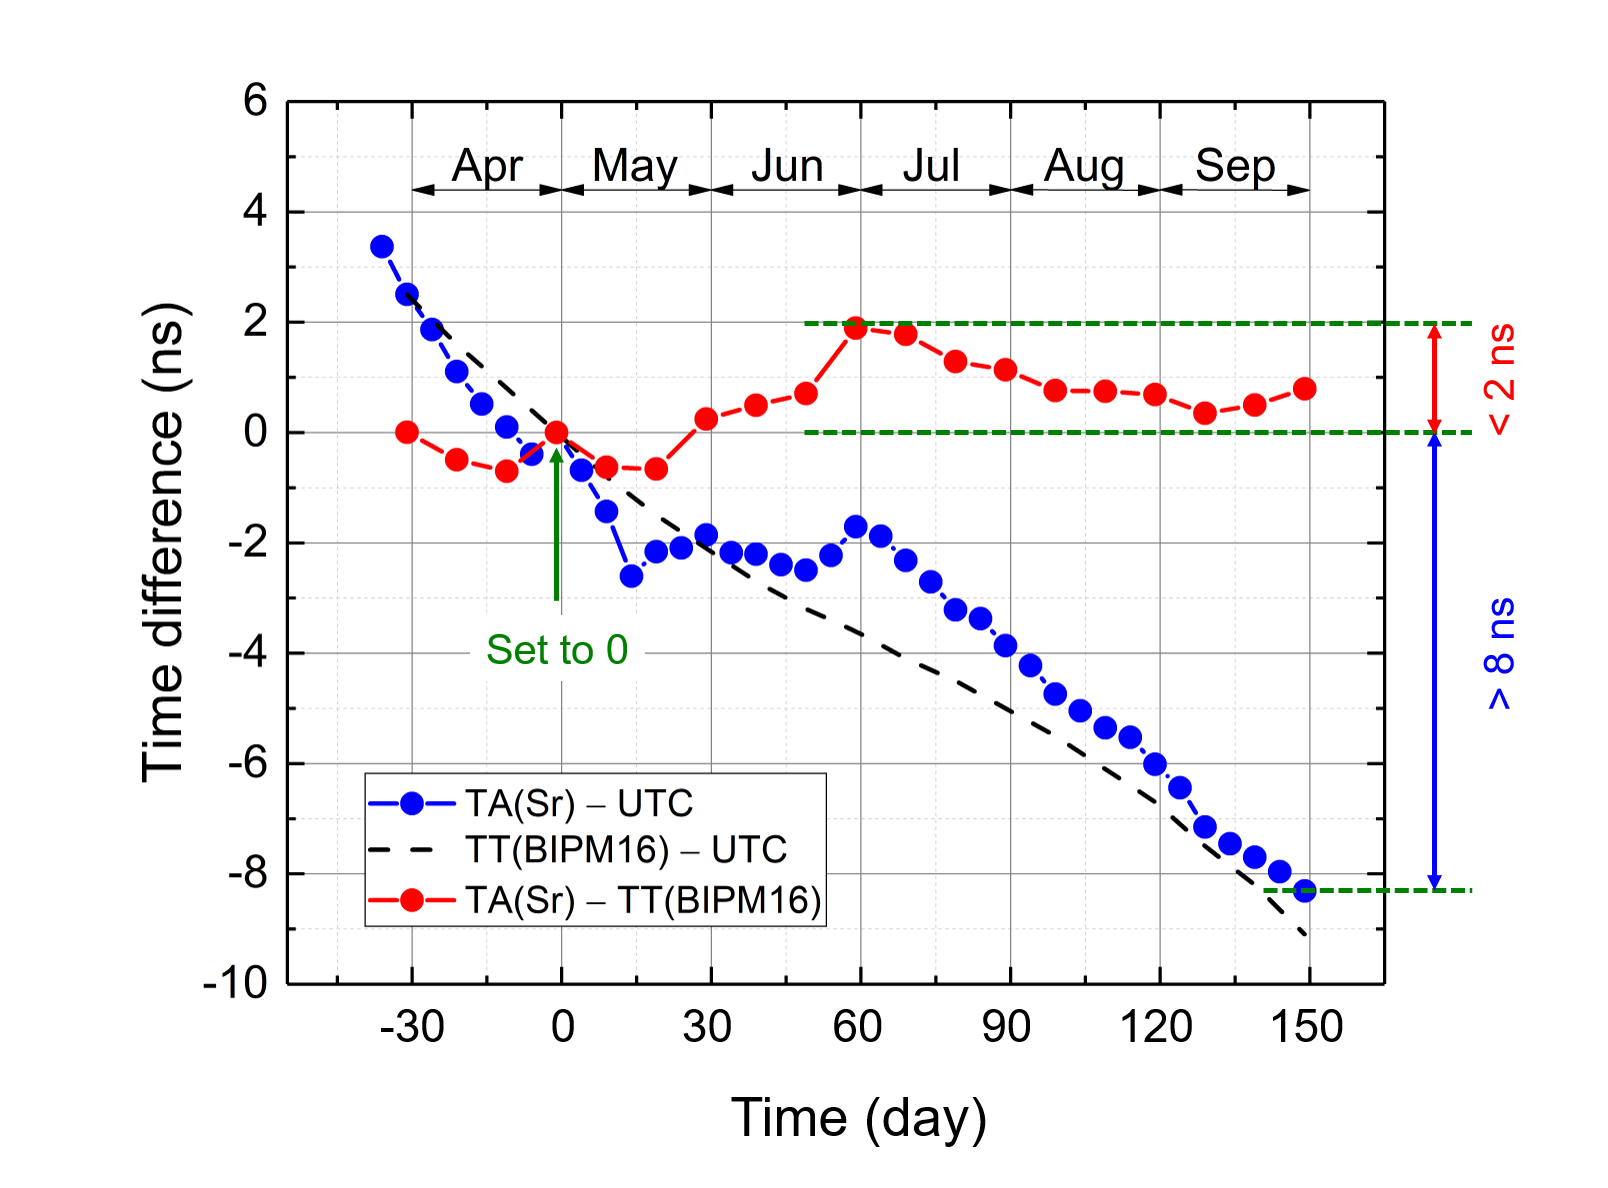 Figure 6. Accuracy of the time scale TA(Sr) generated in real-time using an optical lattice clock. The blue and red lines represent the time differences between TA(Sr) and UTC and between TA(Sr) and TT(BIPM), respectively, in nanoseconds. The time difference was adjusted to 0 at the beginning of May. The black dashed line represents the time difference between TT(BIPM) and UTC.